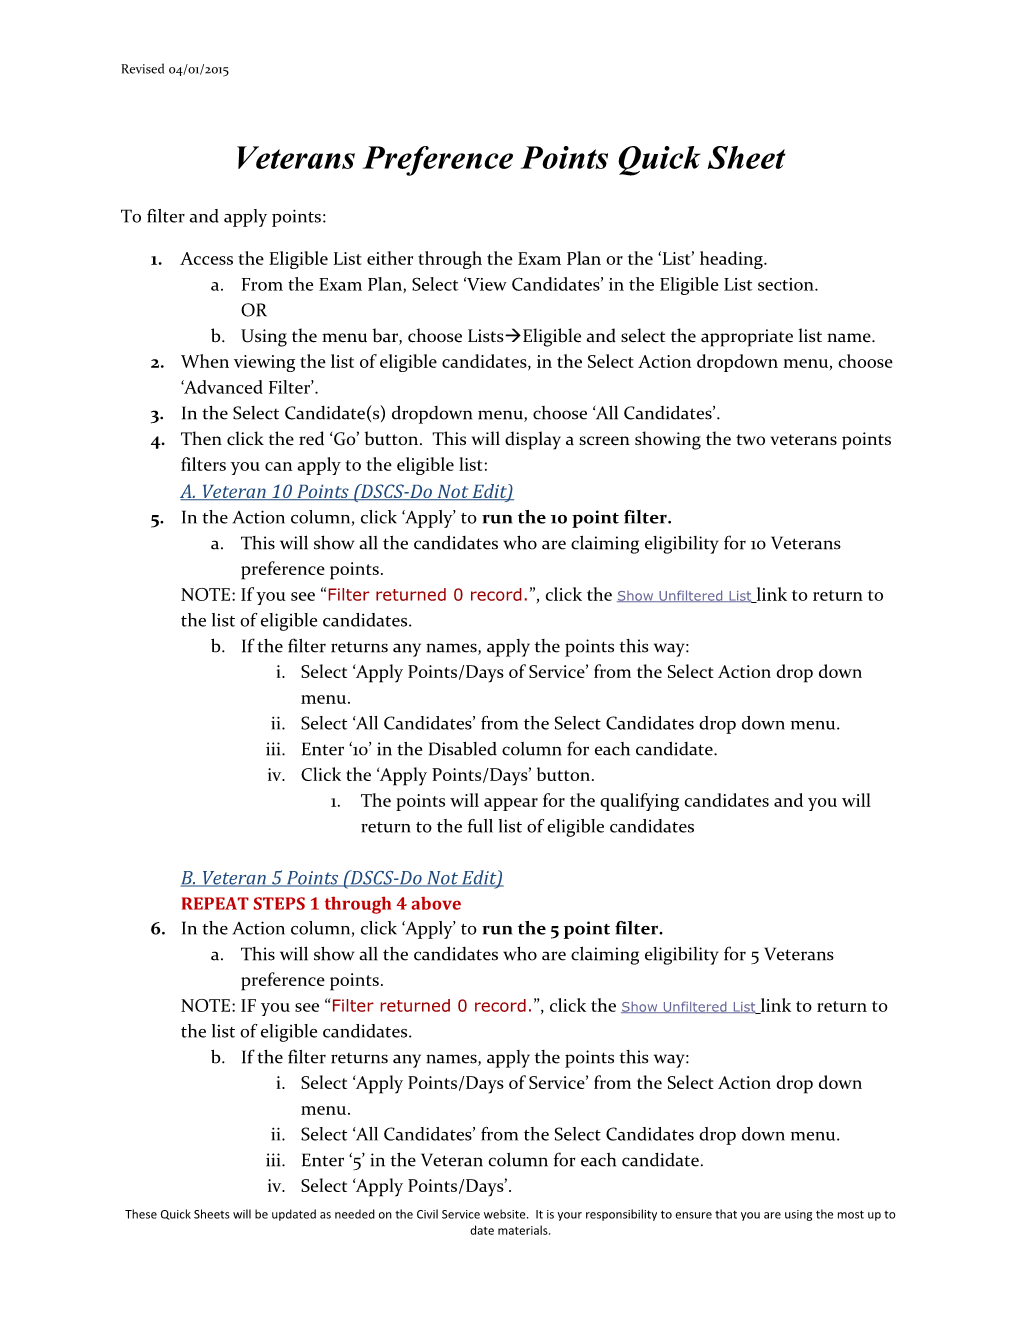 Veterans Preference Points Quick Sheet